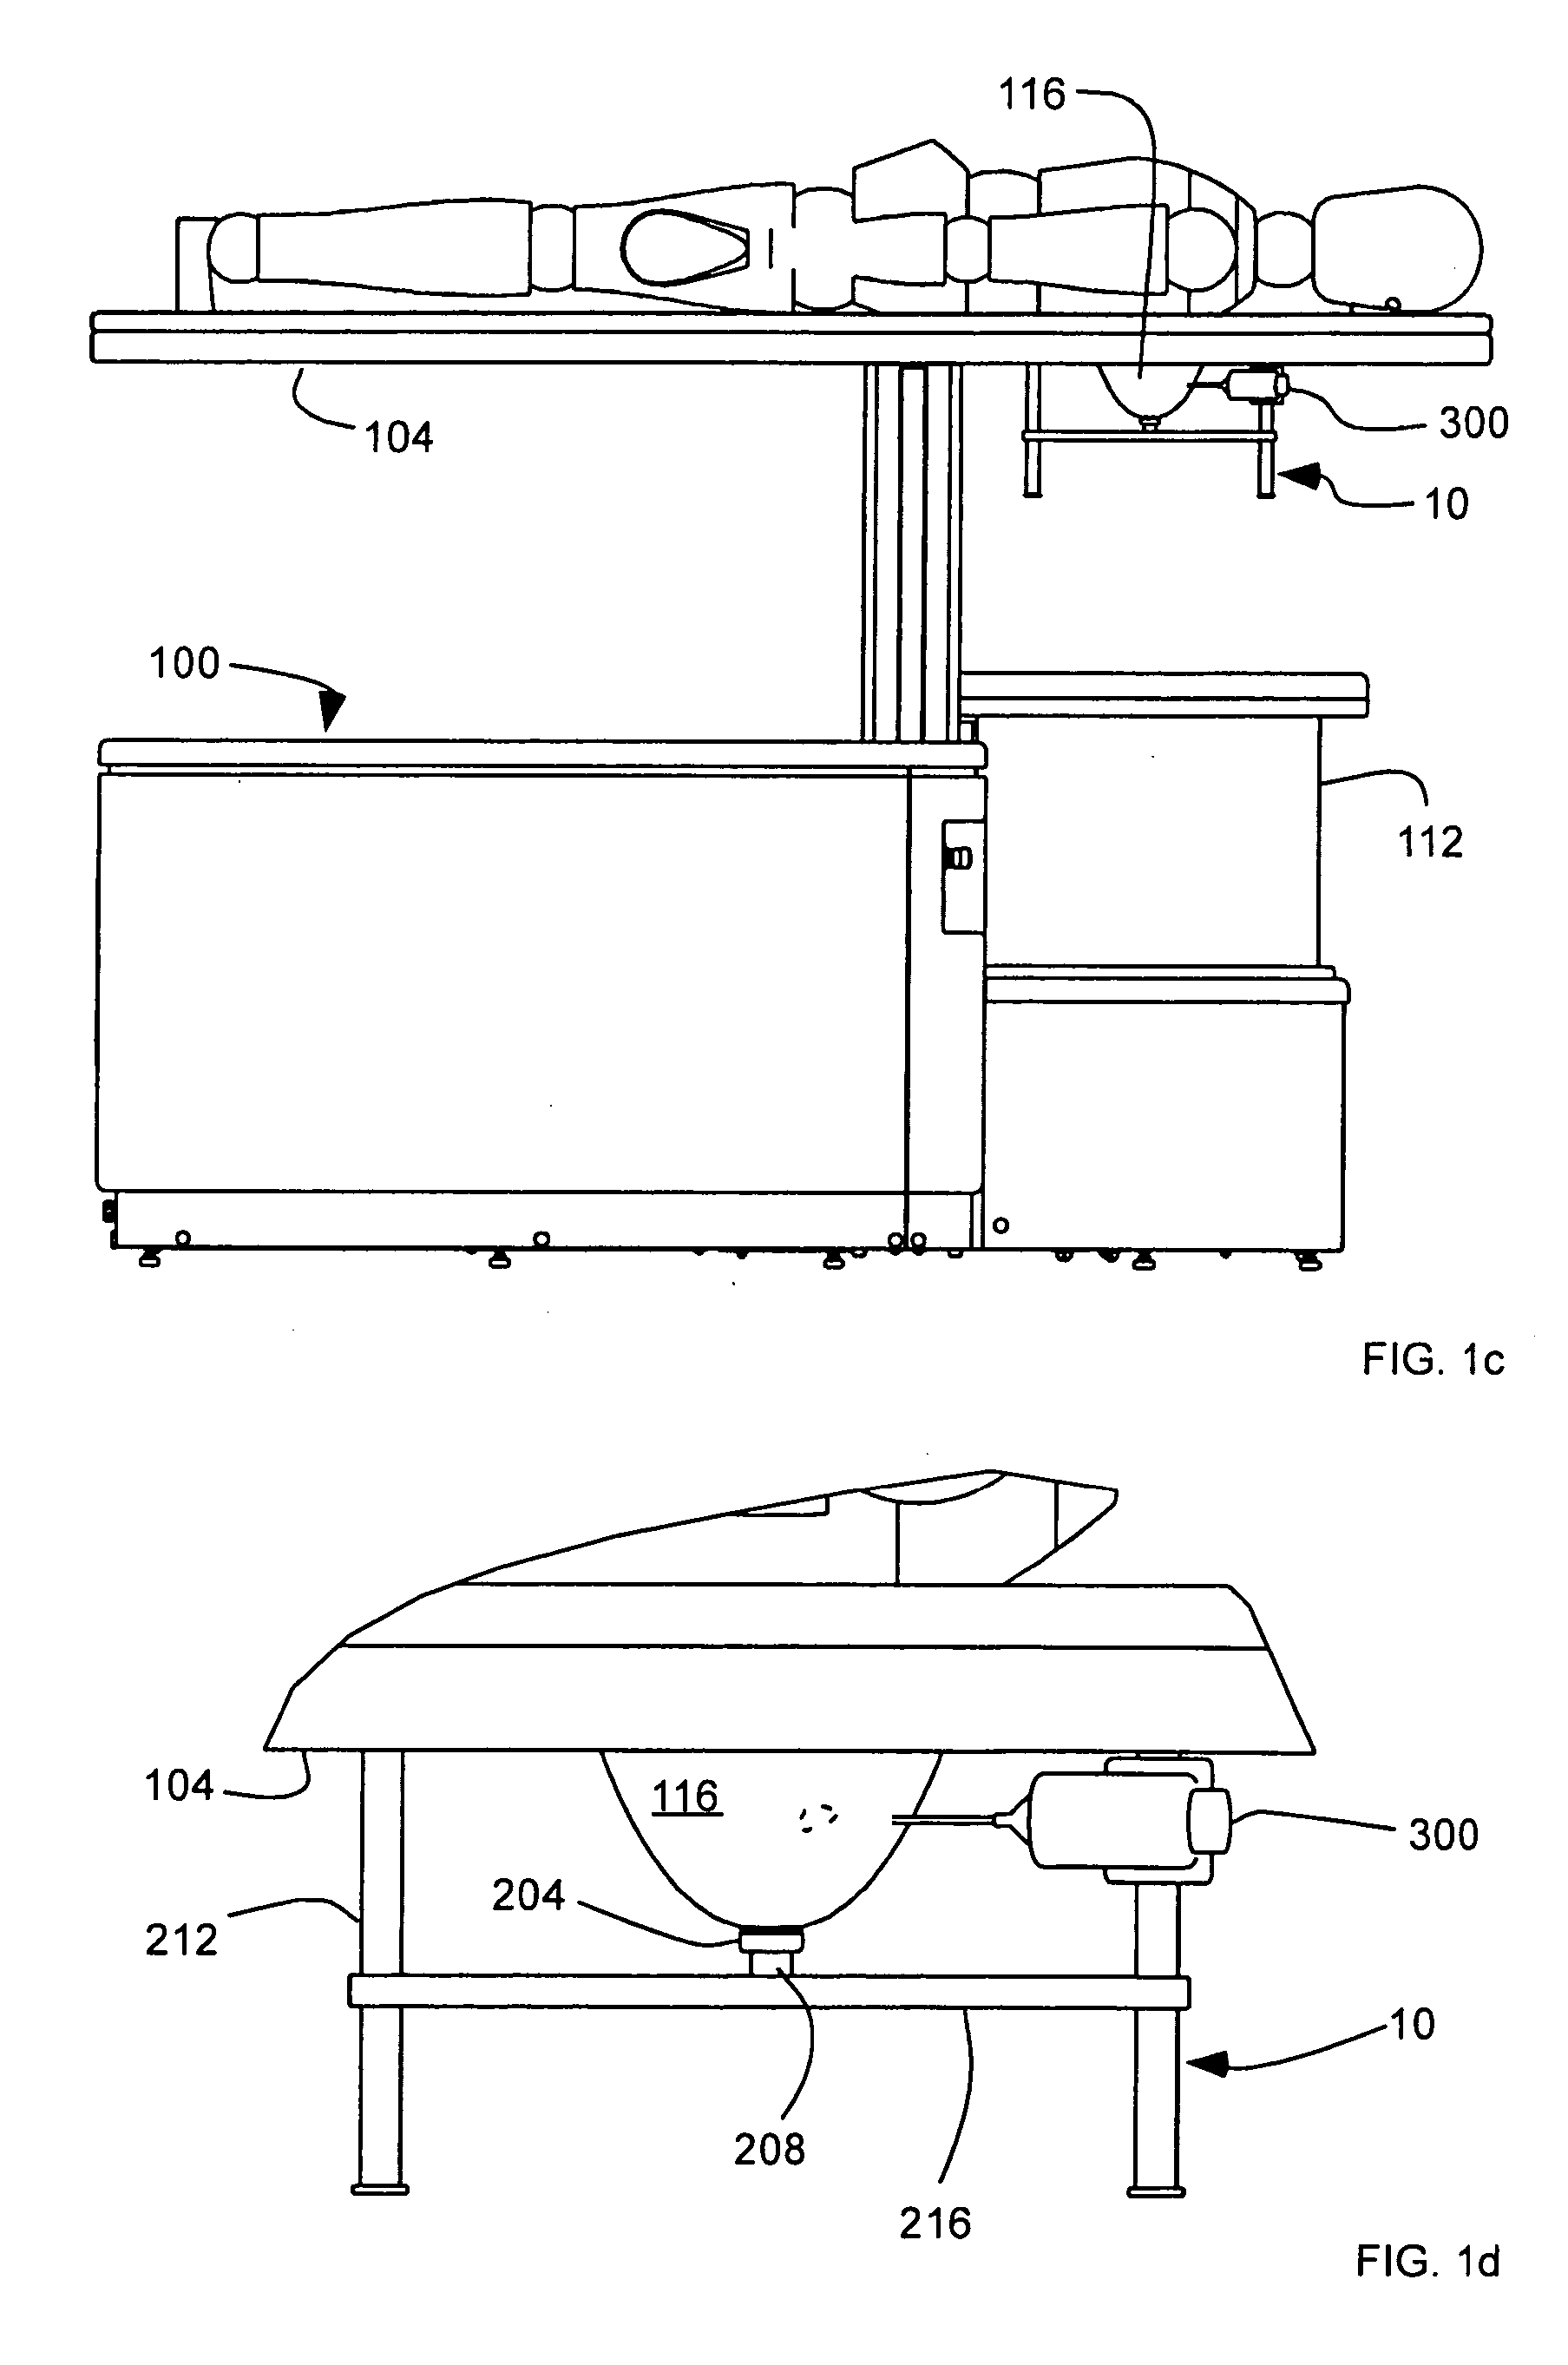 Apparatus for imaging and treating a breast